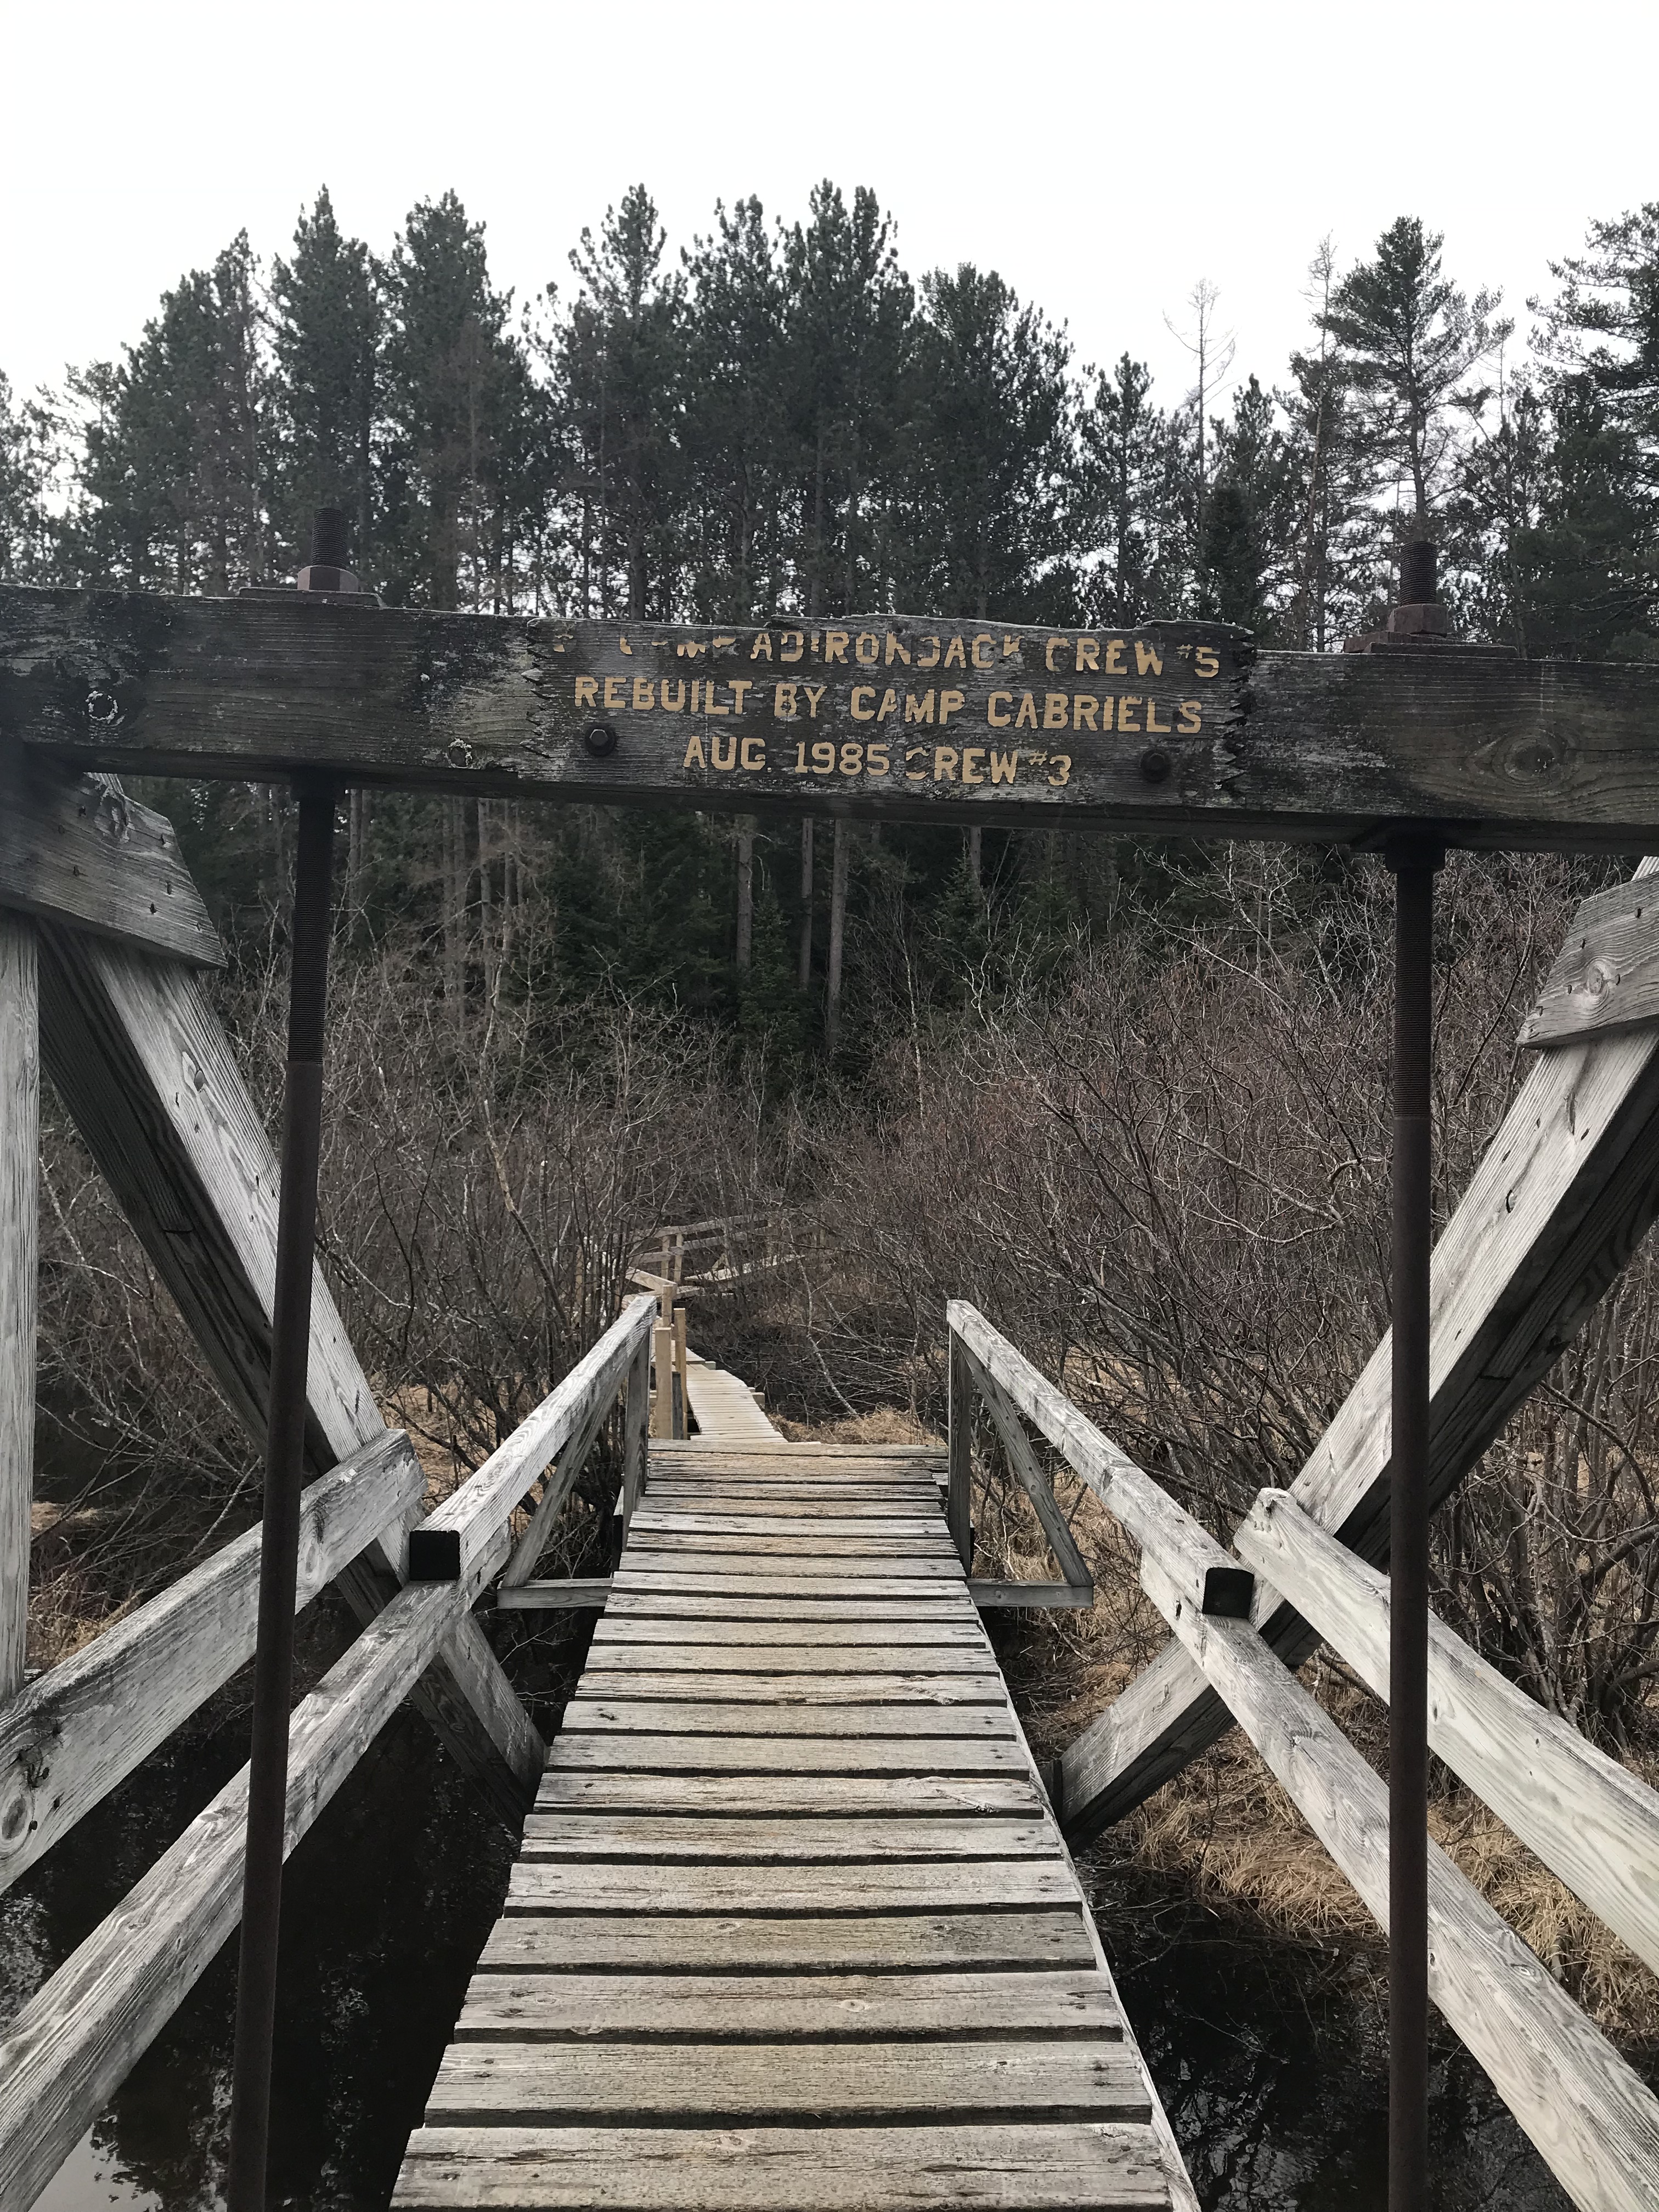 Sign on bridge by Camp Cabriels